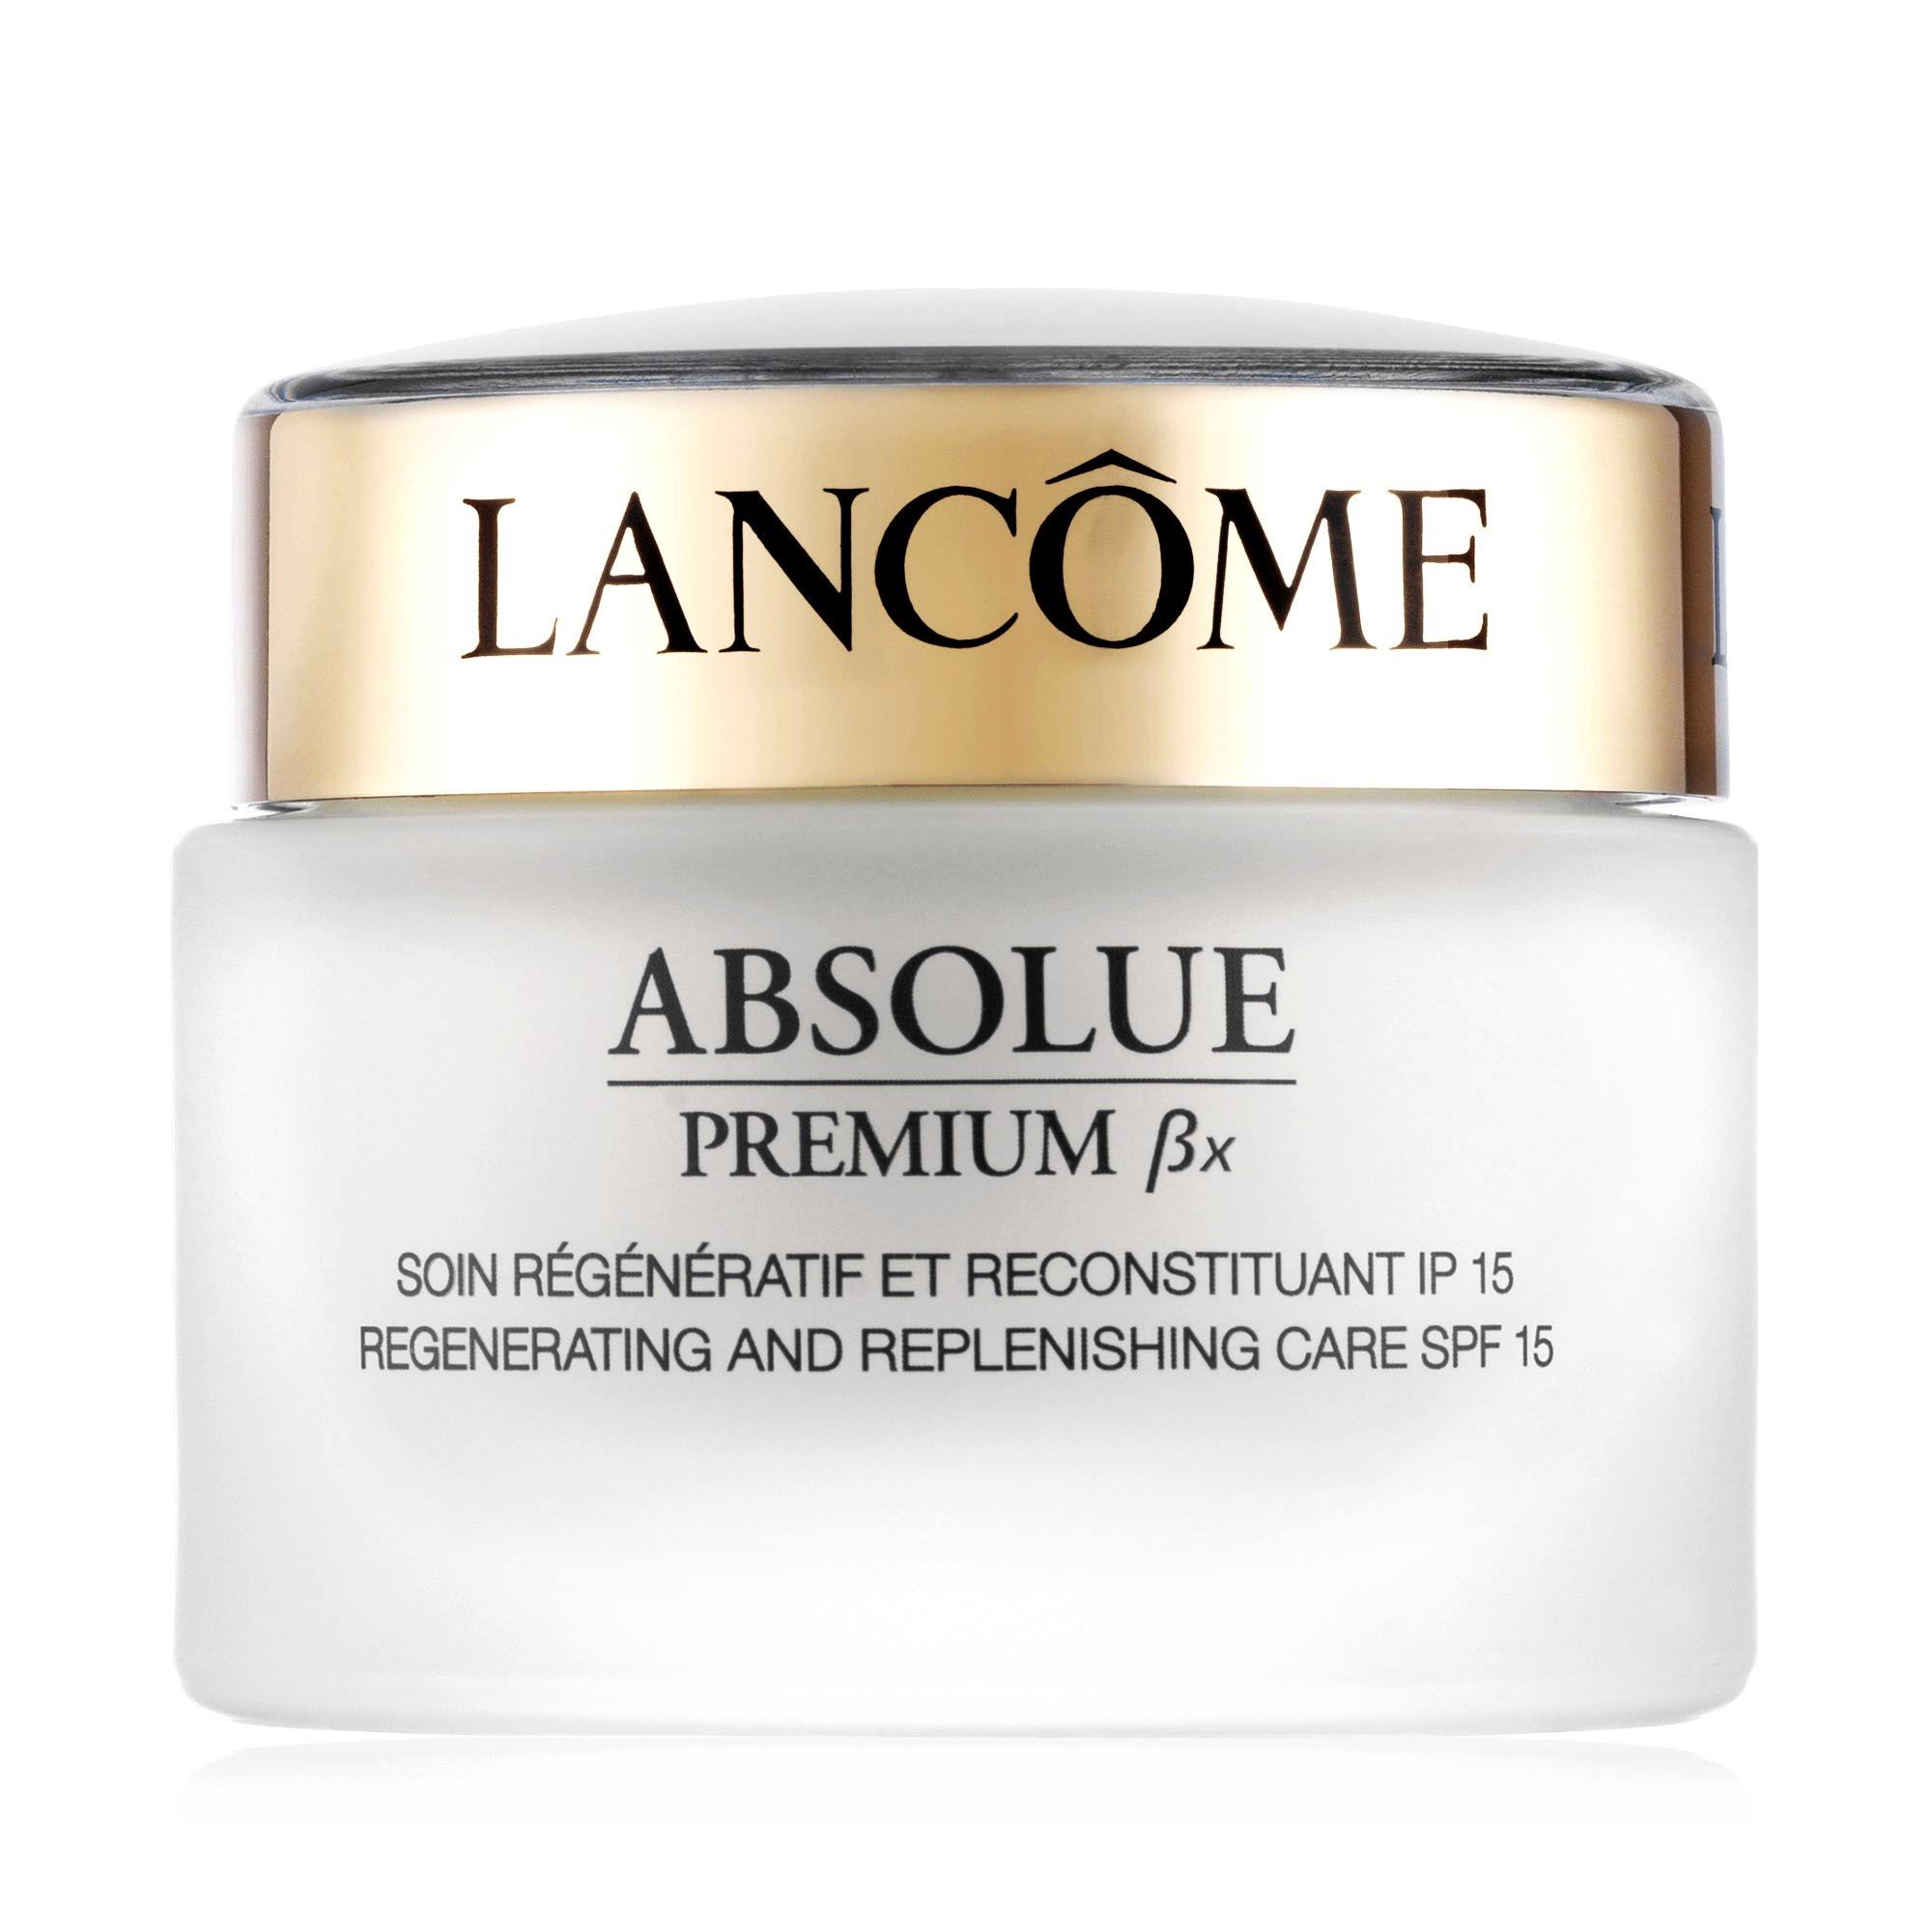 Lancome Absolue Premium Bx Regenerating and Replenishing Care SPF 15